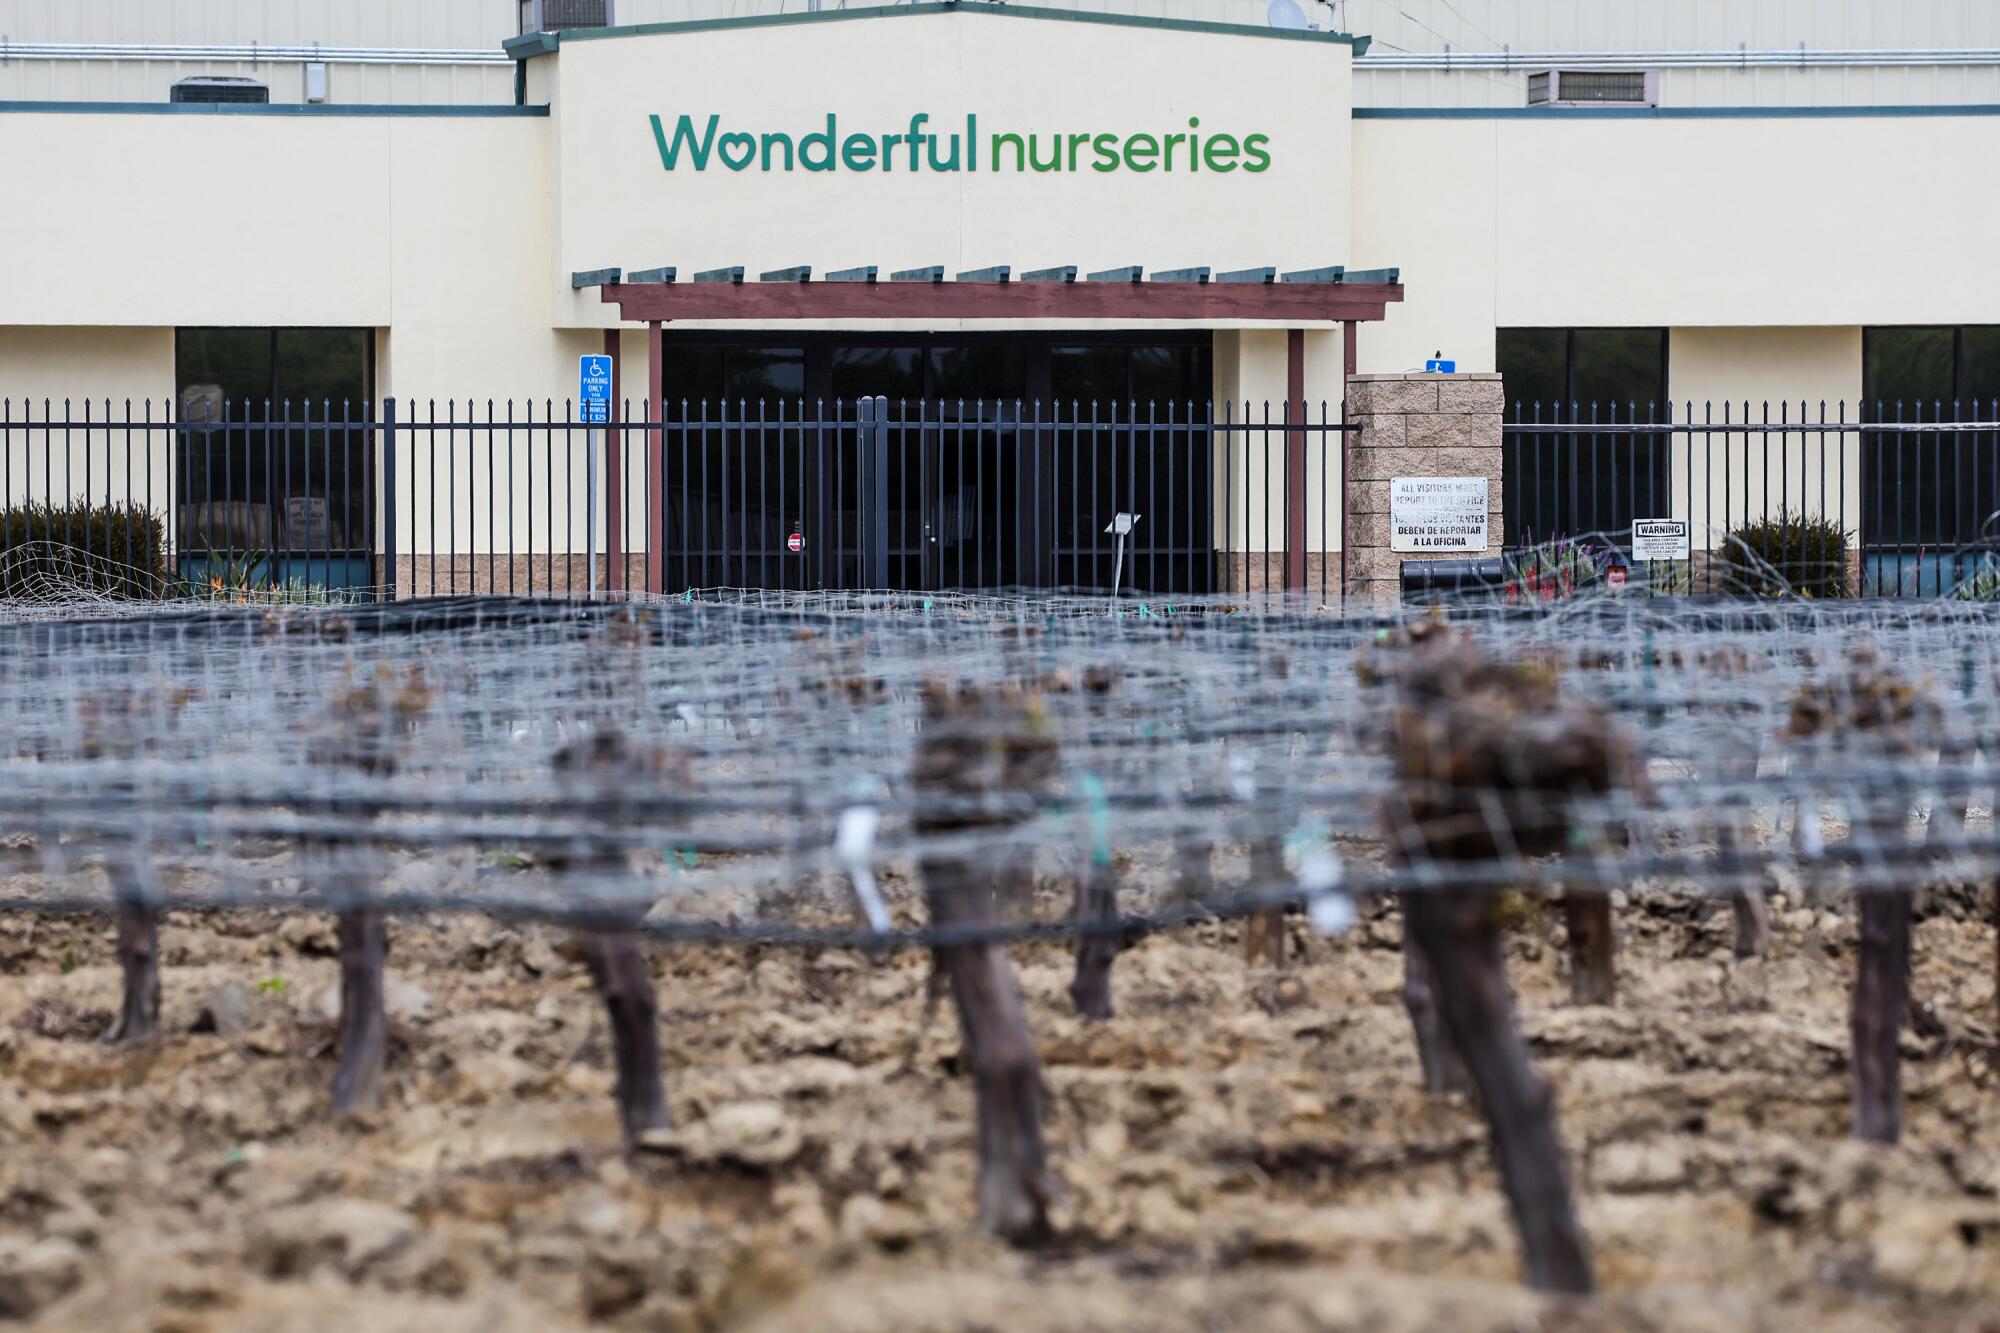 A field of grapevines in front of Wonderful Nurseries in Wasco